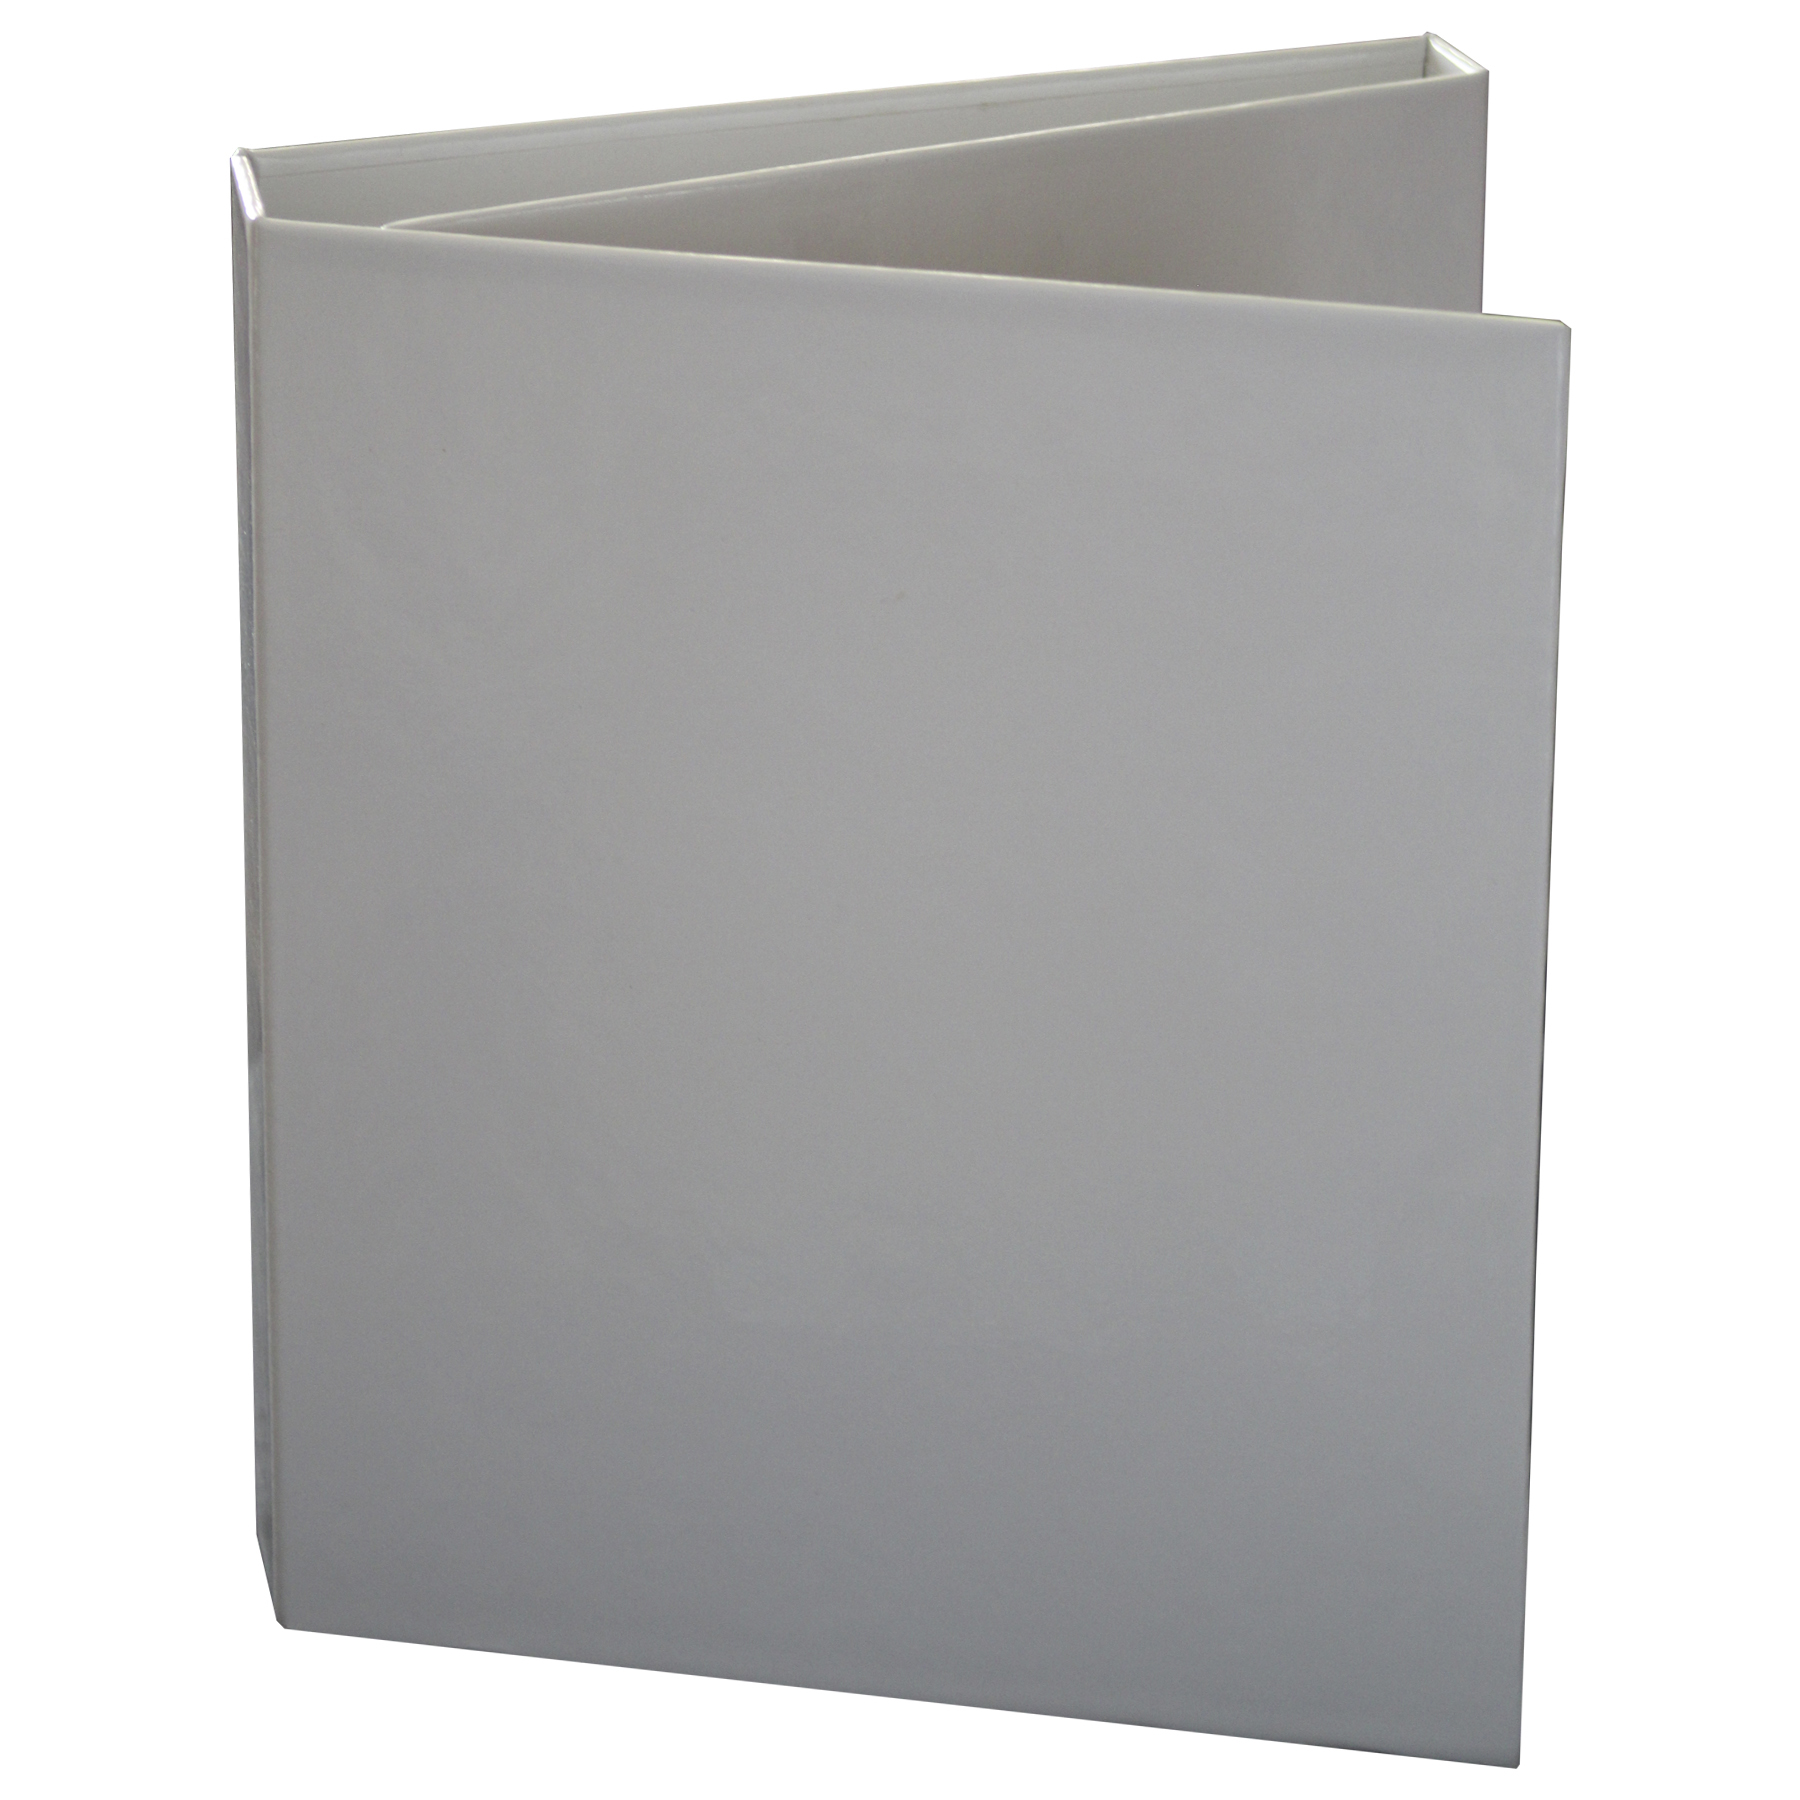 Glossy White Sturdy Architectural Presentaton Binder for Surface Samples Great for Sales Presentations and Developer Offices